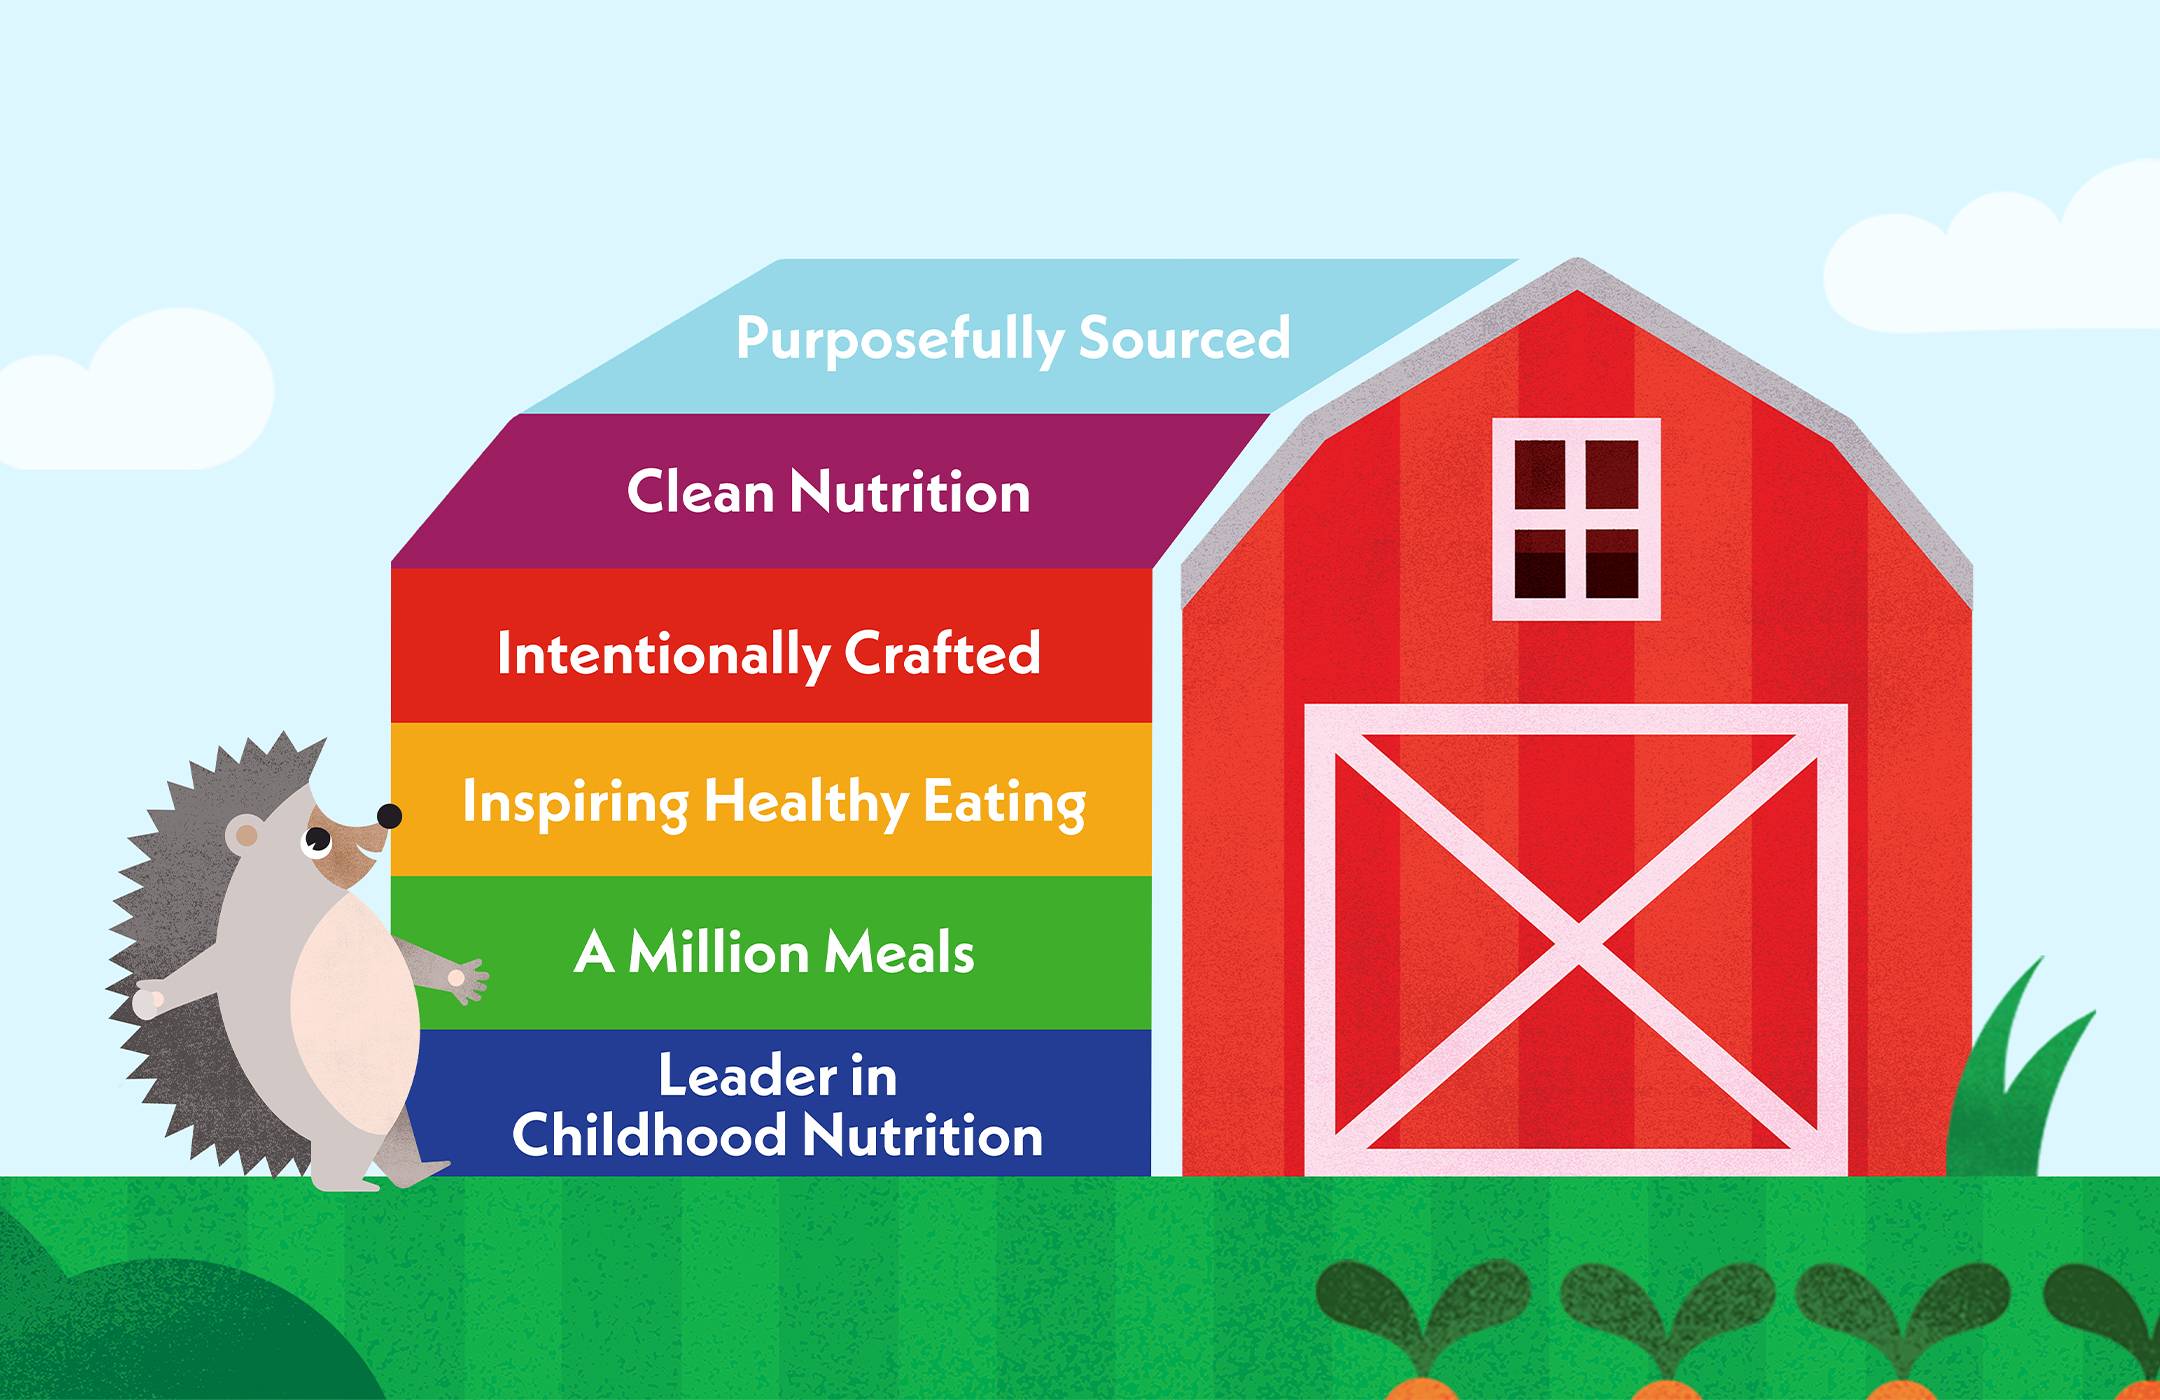 Illustration of the Building Blocks that Make Up The Once Upon a Farm Barn